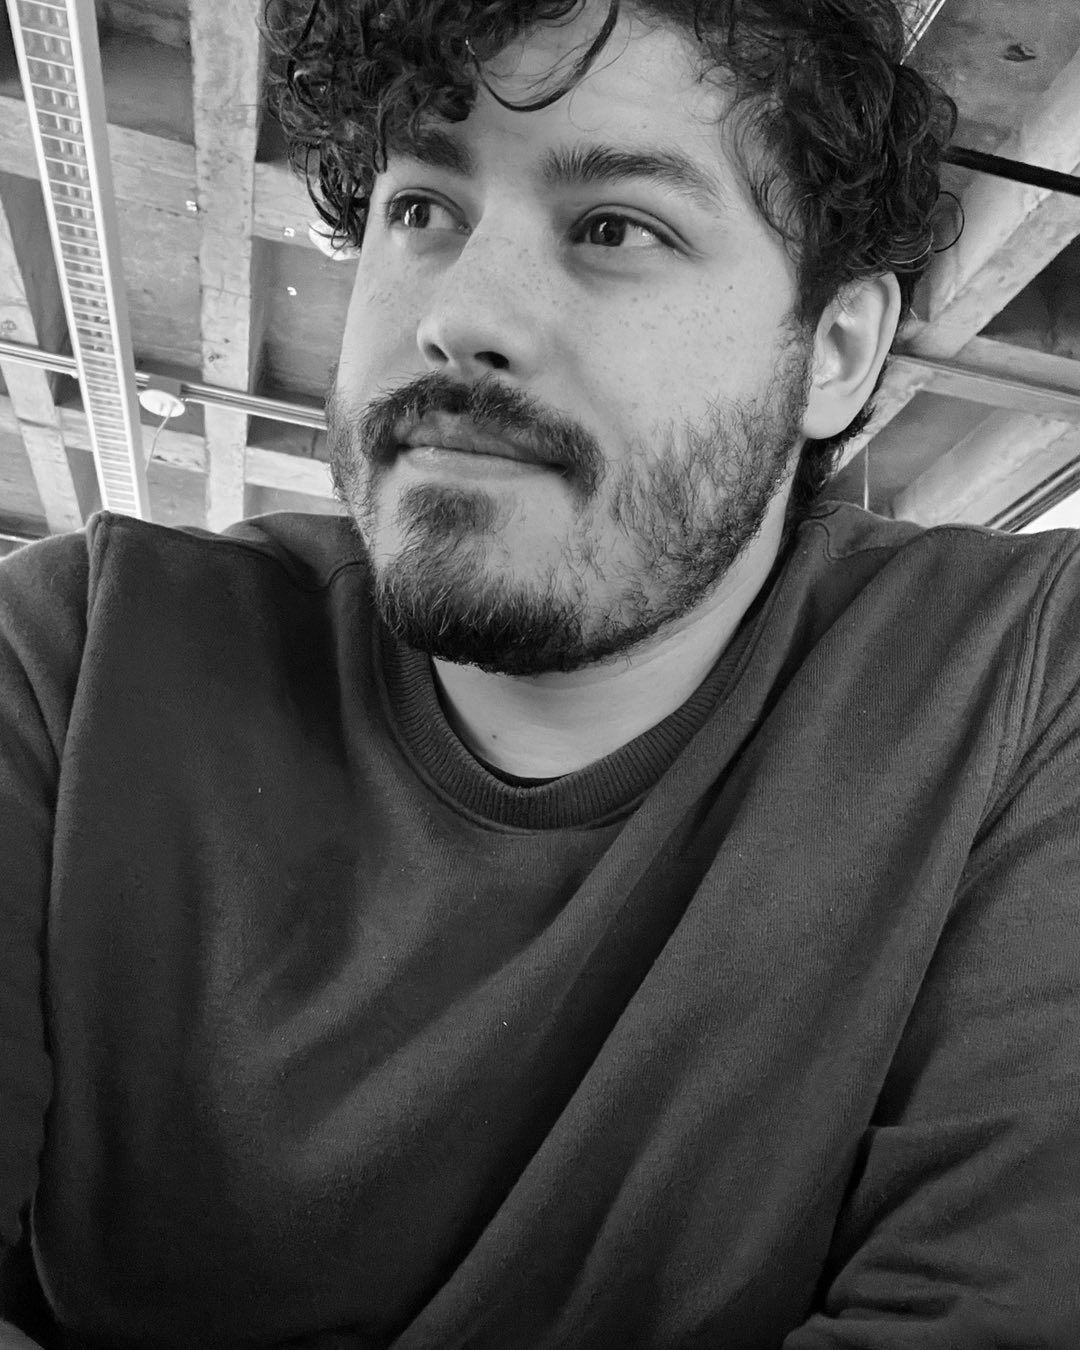 Darian Rosebrook, a product designer from the Portland, Oregon area. He specializes in design systems, design technology, and custom design tooling.